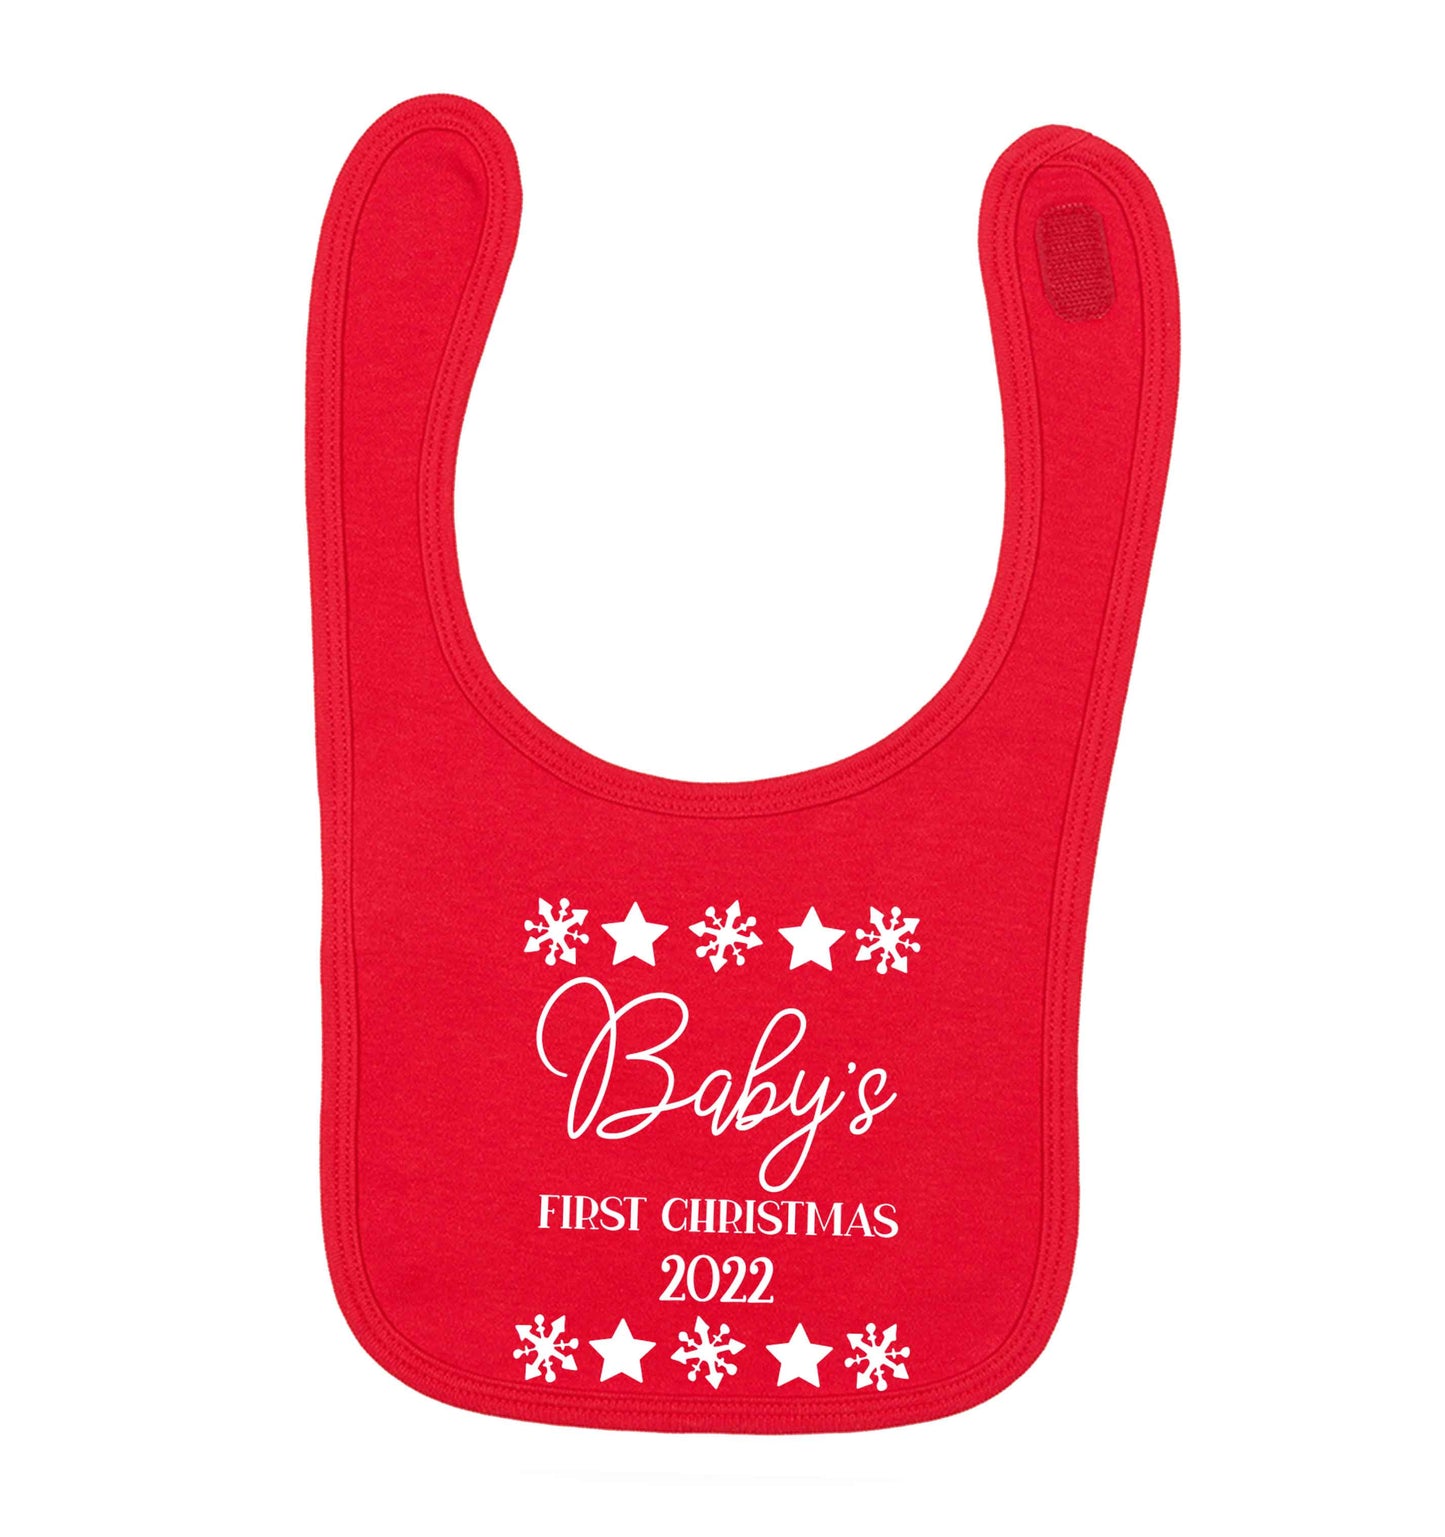 Baby's first Christmas red baby bib